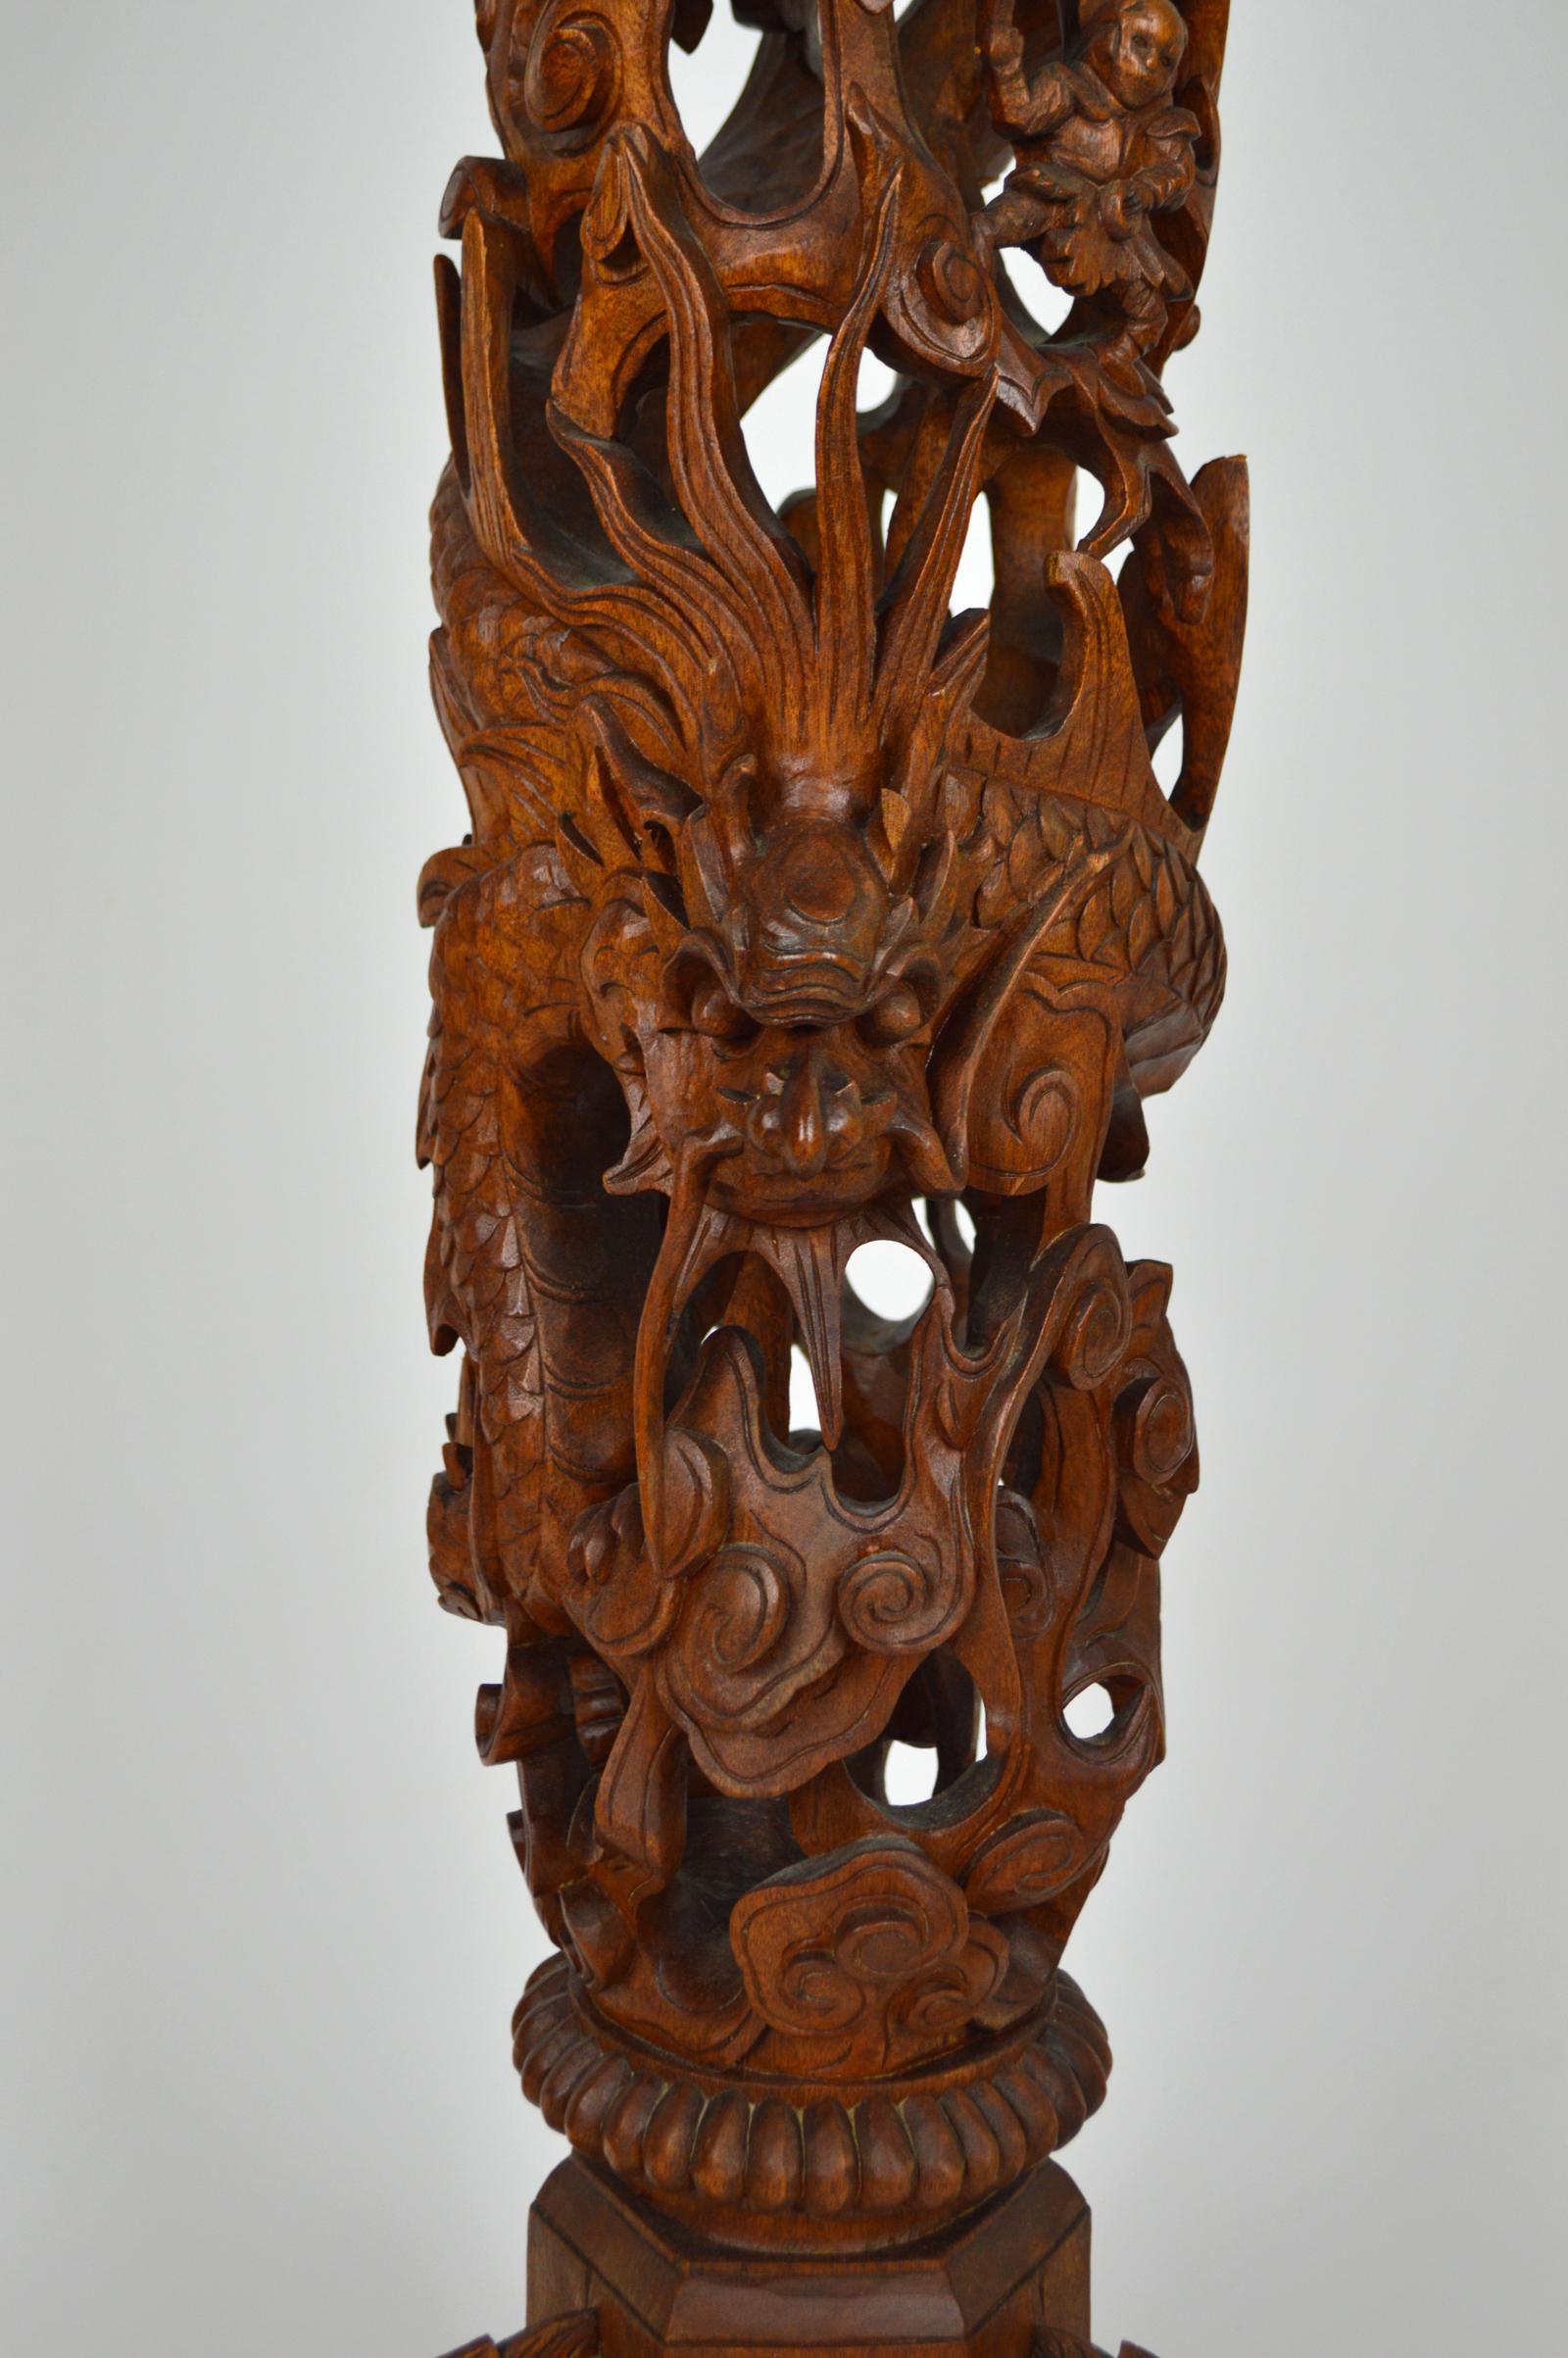 Indochinese Pedestal Table / Pot Stand in Carved Wood, Mythological Theme, 1890s For Sale 4